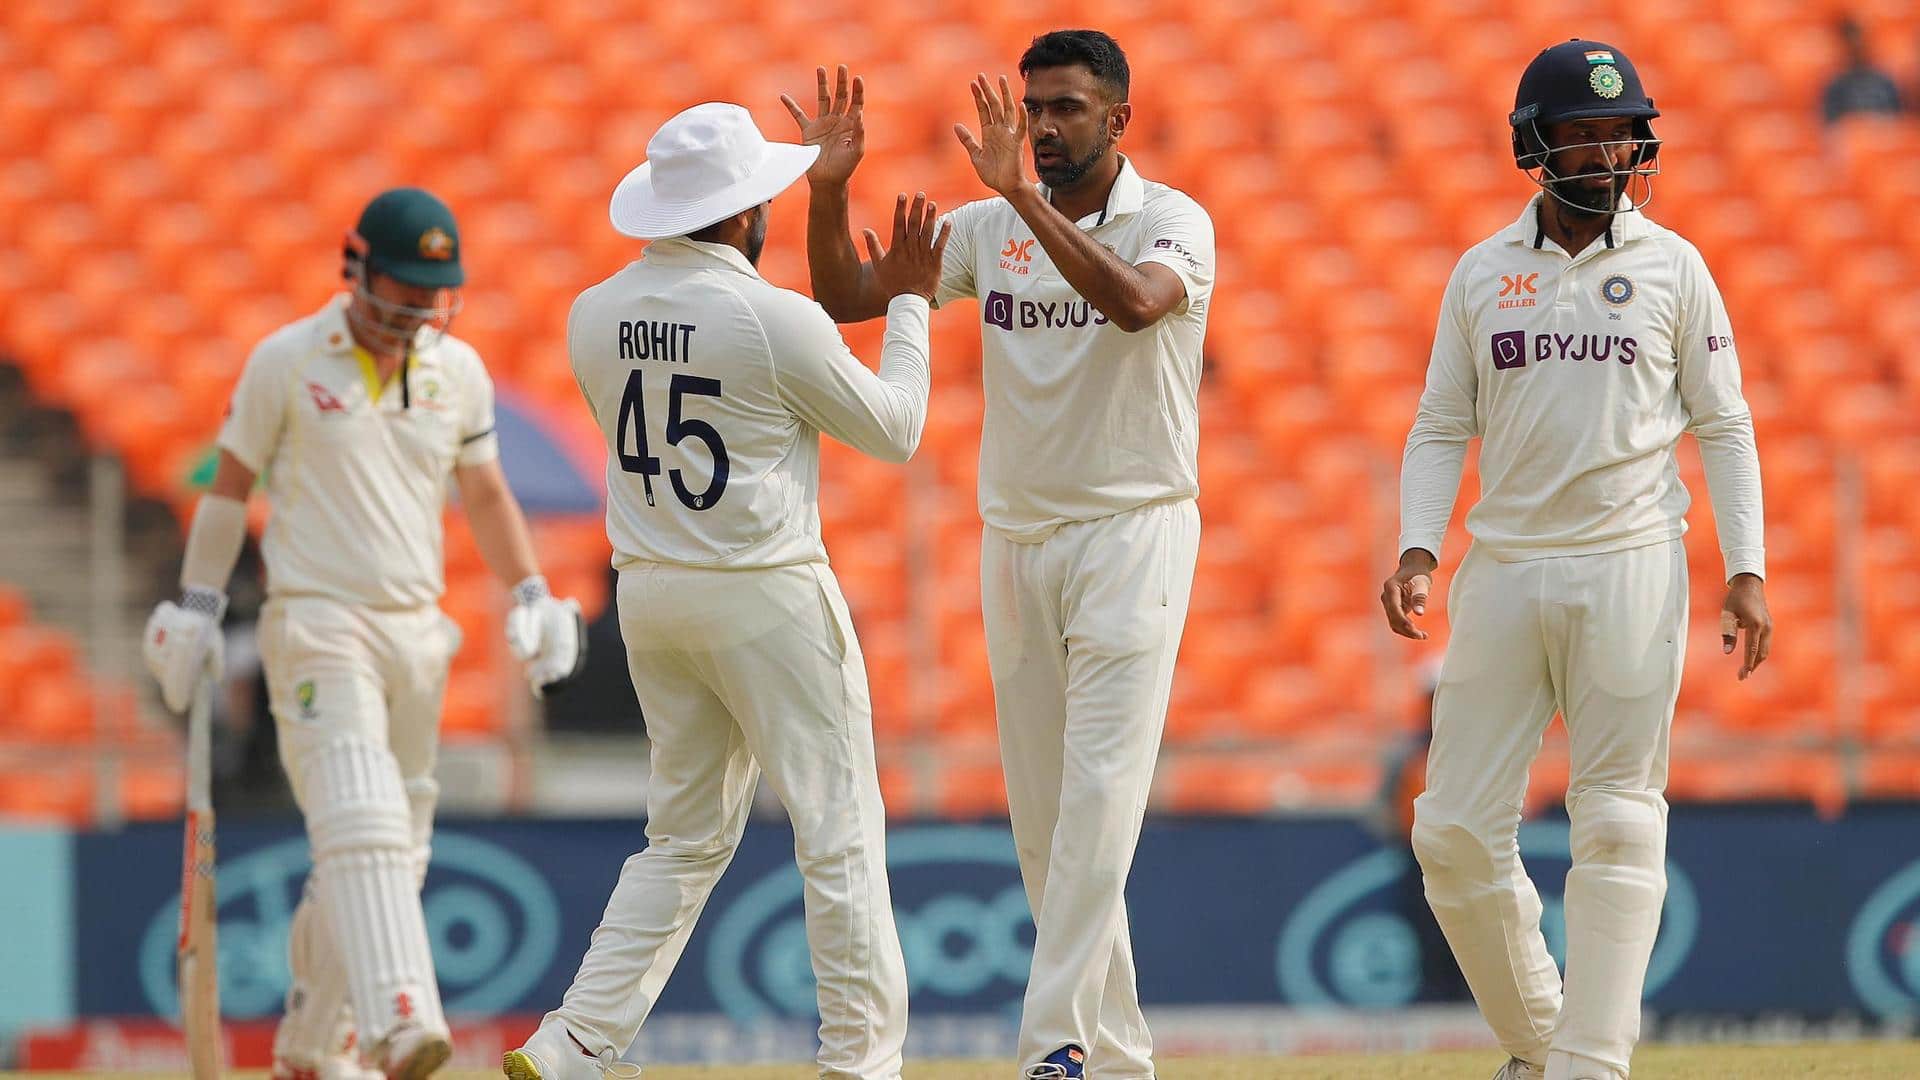 ICC Test Rankings: Ashwin steers clear of Anderson among bowlers